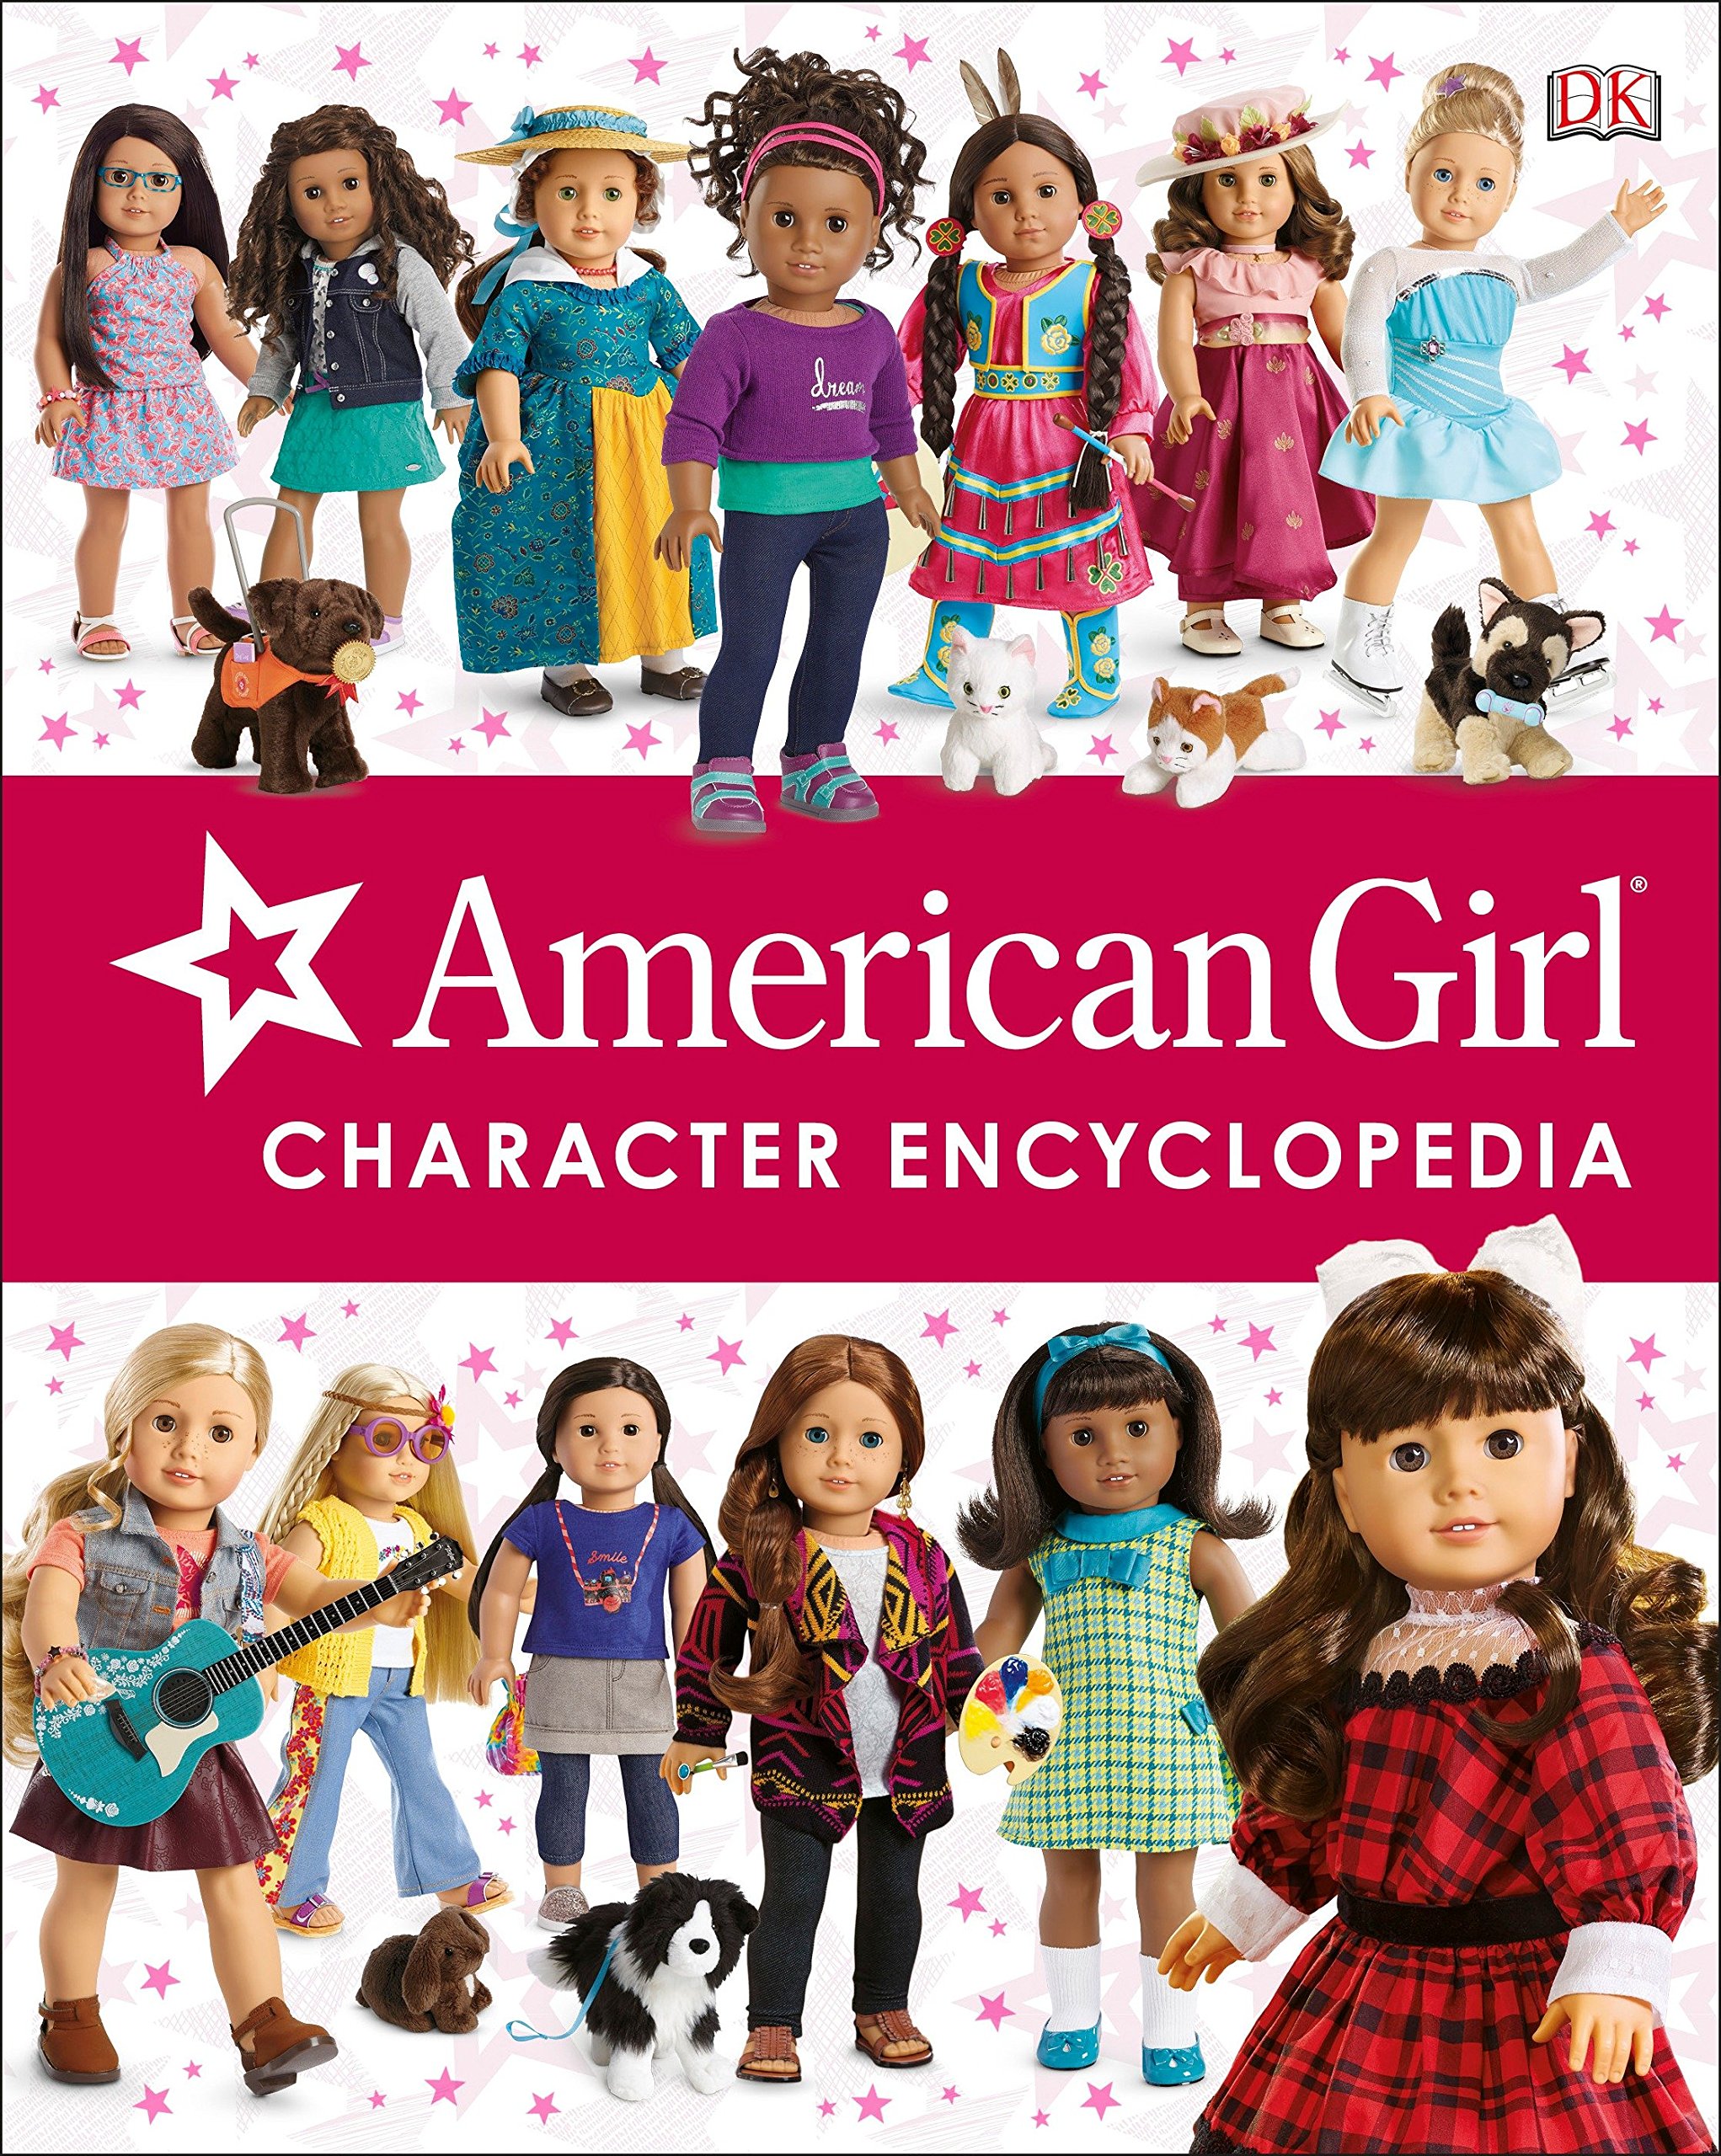 Introducing the Williams-Sonoma American Girl Collection